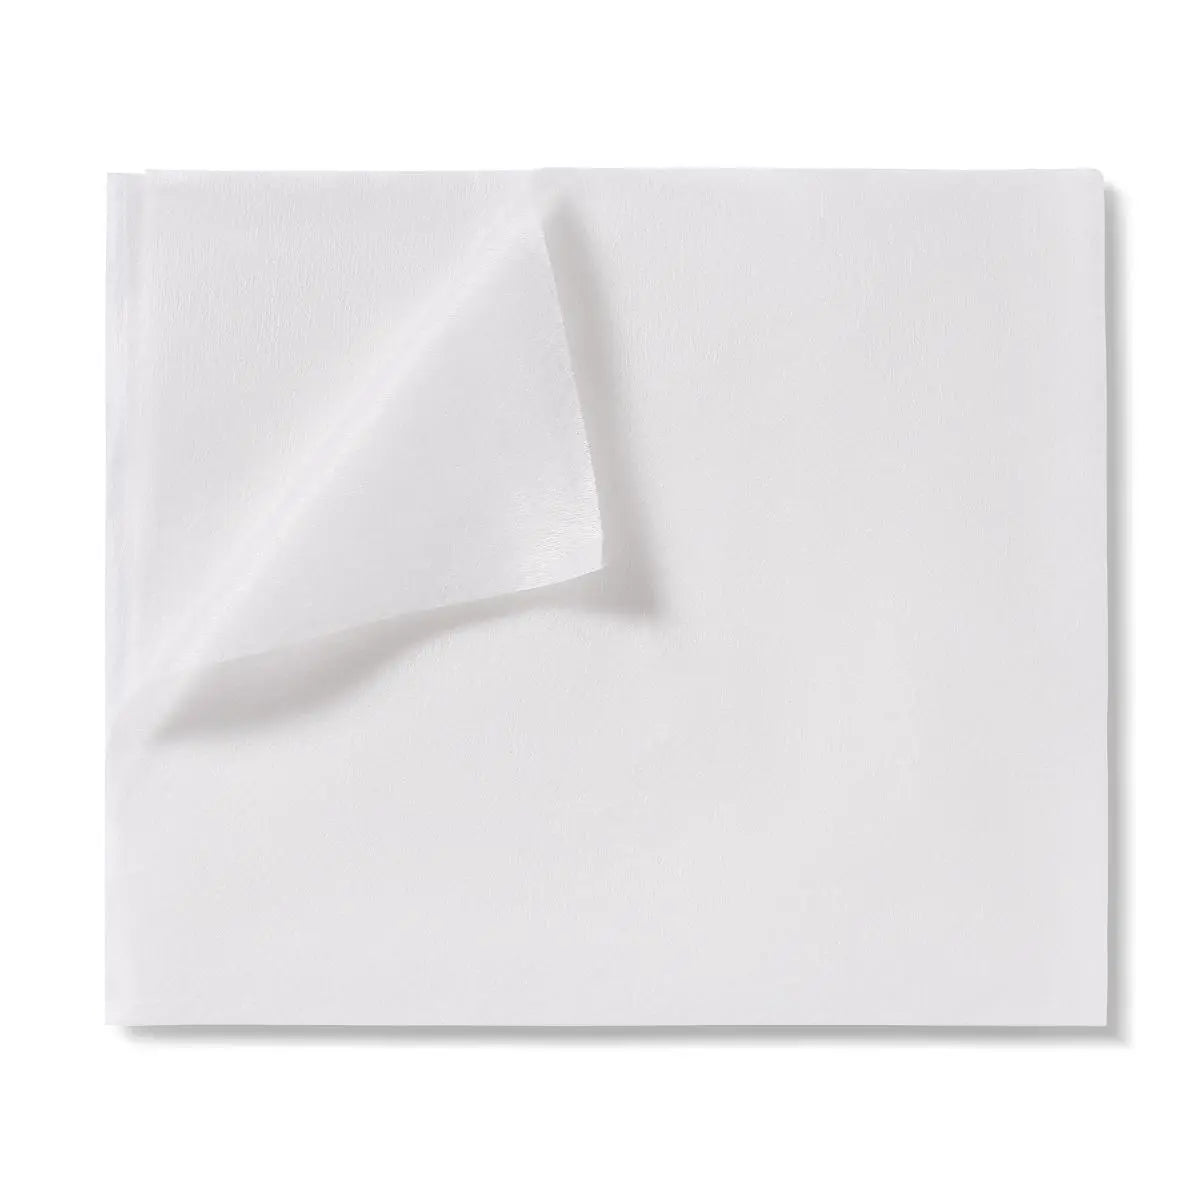 ULTRASOFT713 CS/1200 ULTRA-SOFT DISPOSABLE DRY CLEANING CLOTH.